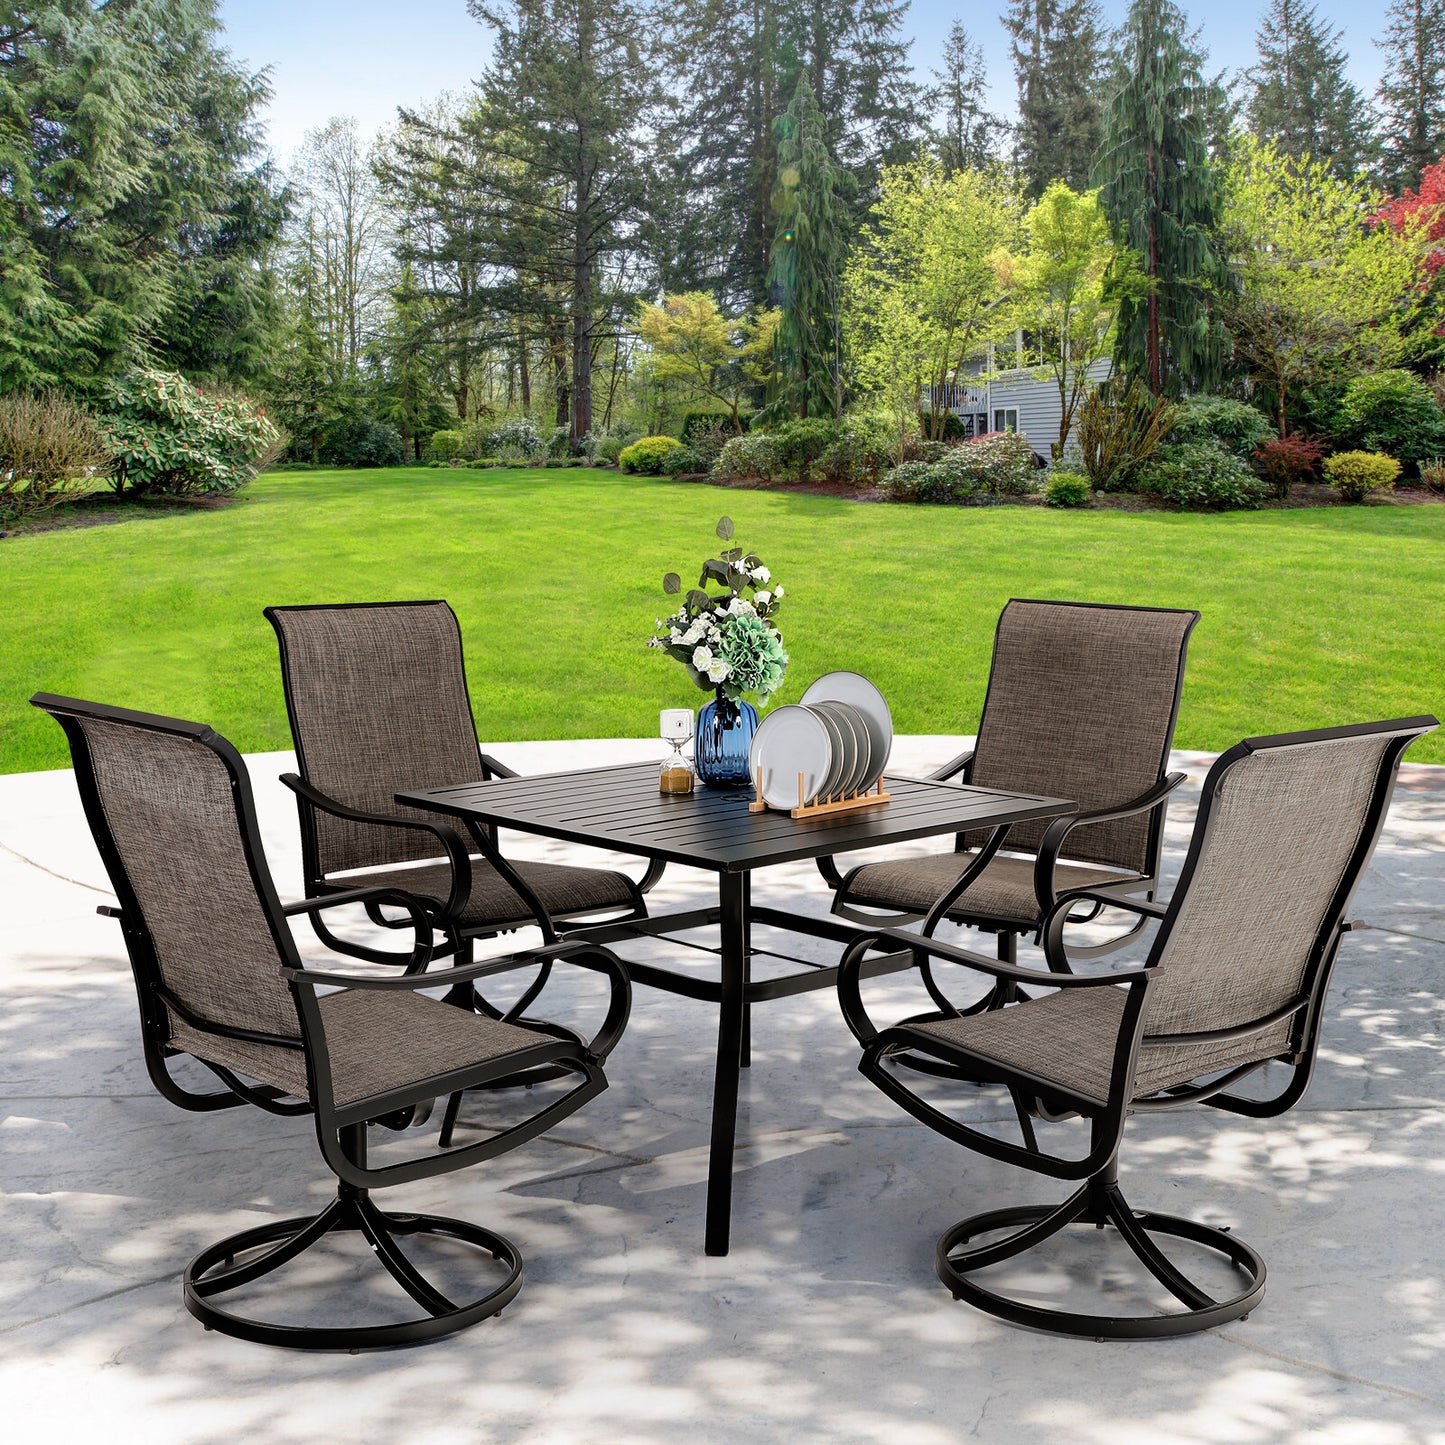 Sophia & William 5 Piece Metal Outdoor Patio Dining Bistro Set Outdoor Furniture Set with 1 Steel Square Table & 4 Text Ilene Swivel Chairs, Black